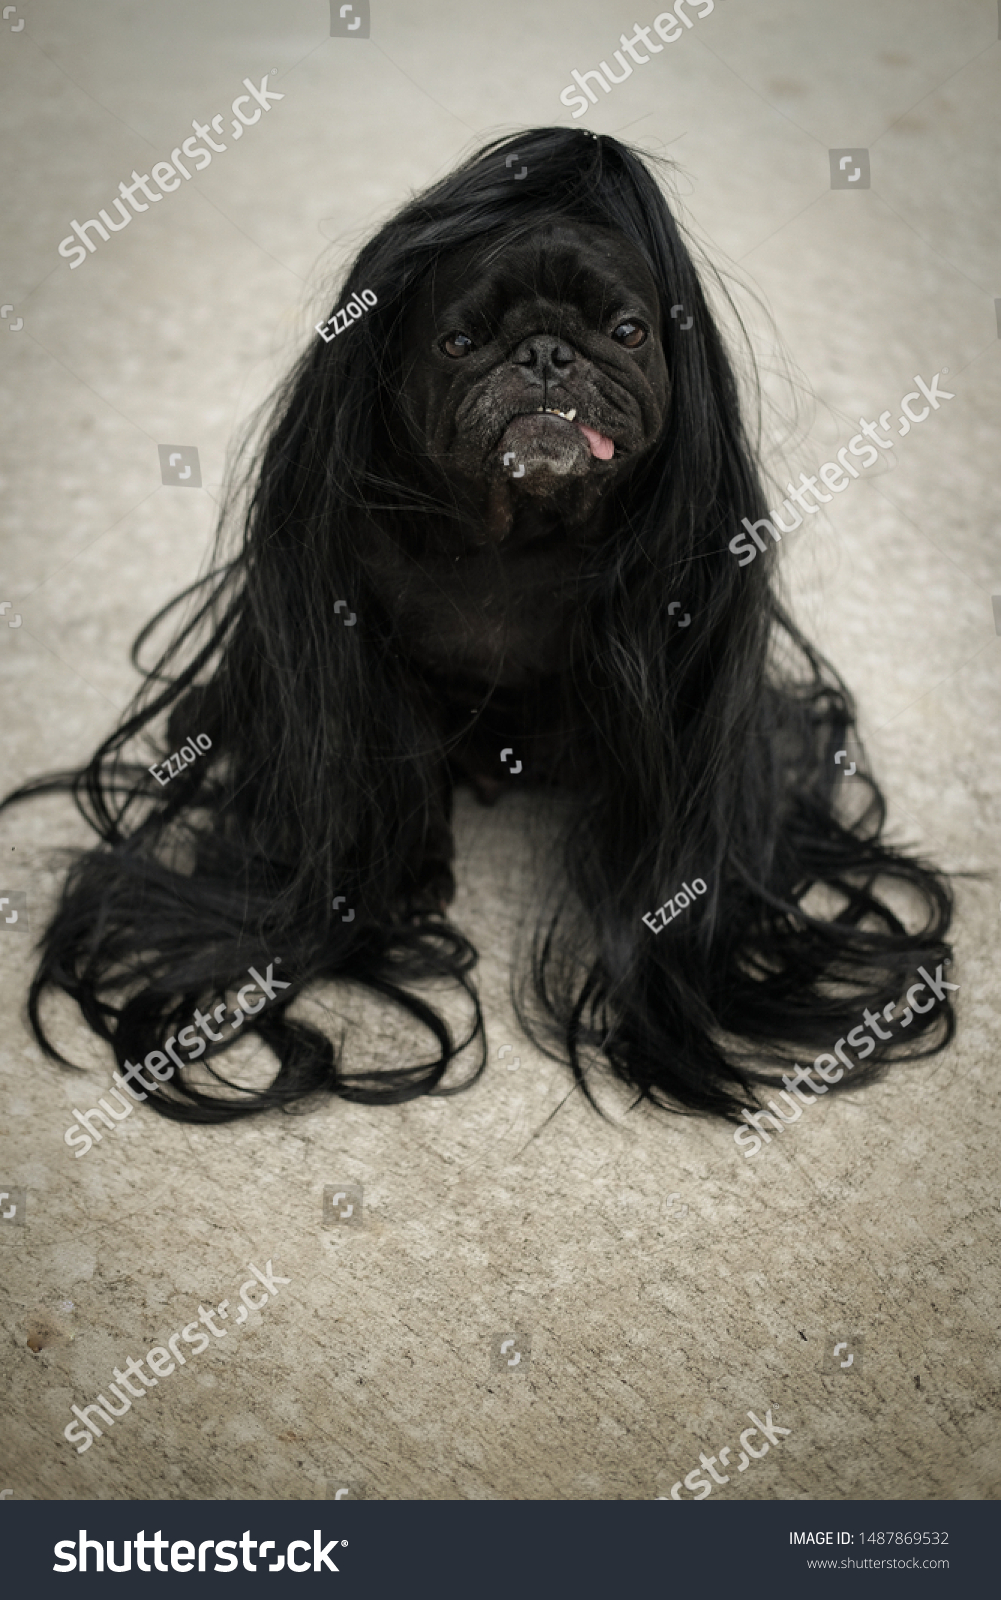 long haired pug looking dog